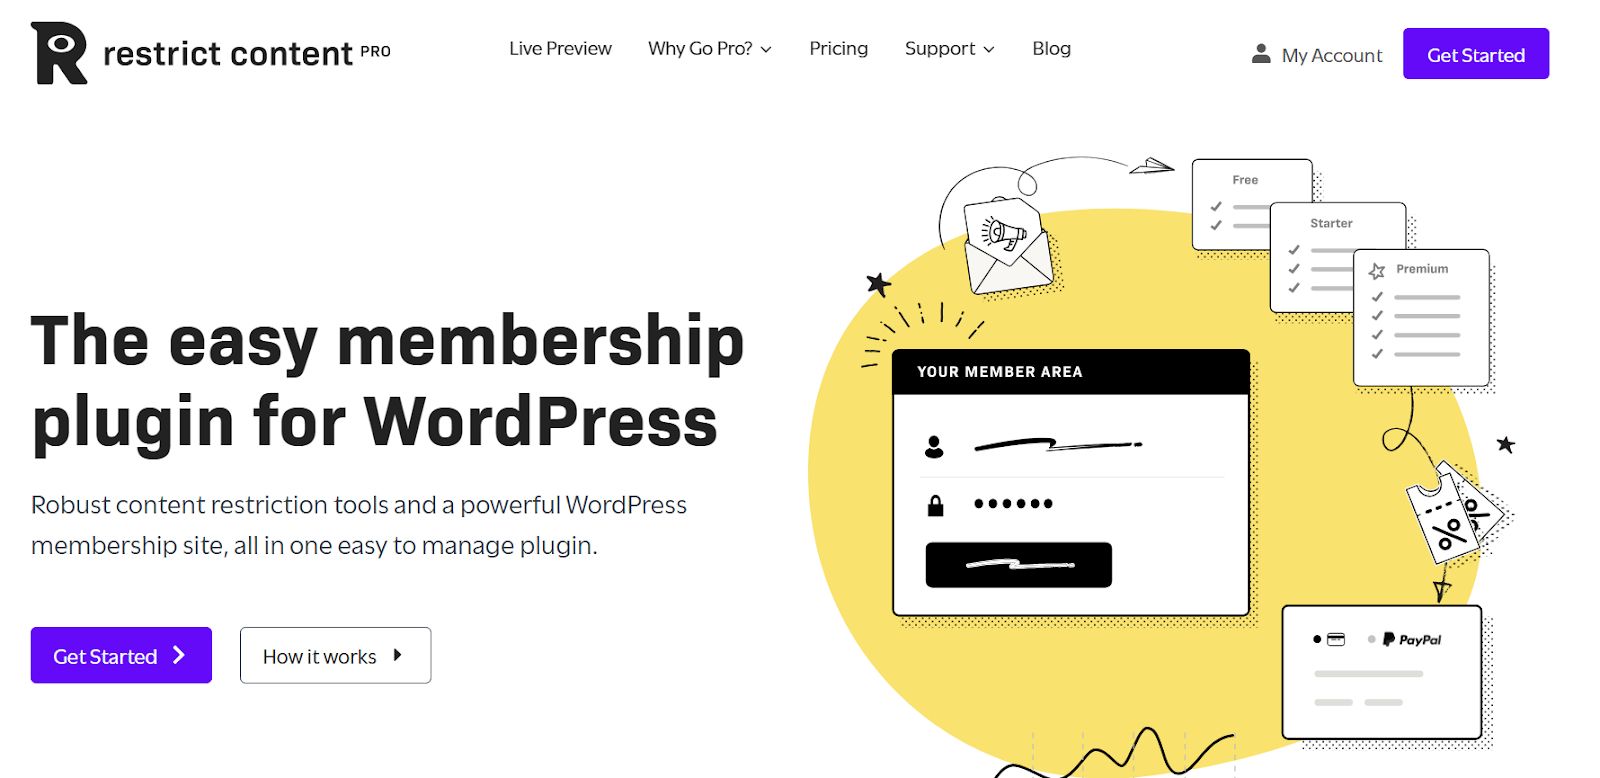 Restrict Content Pro lets you set up memberships on your website. 